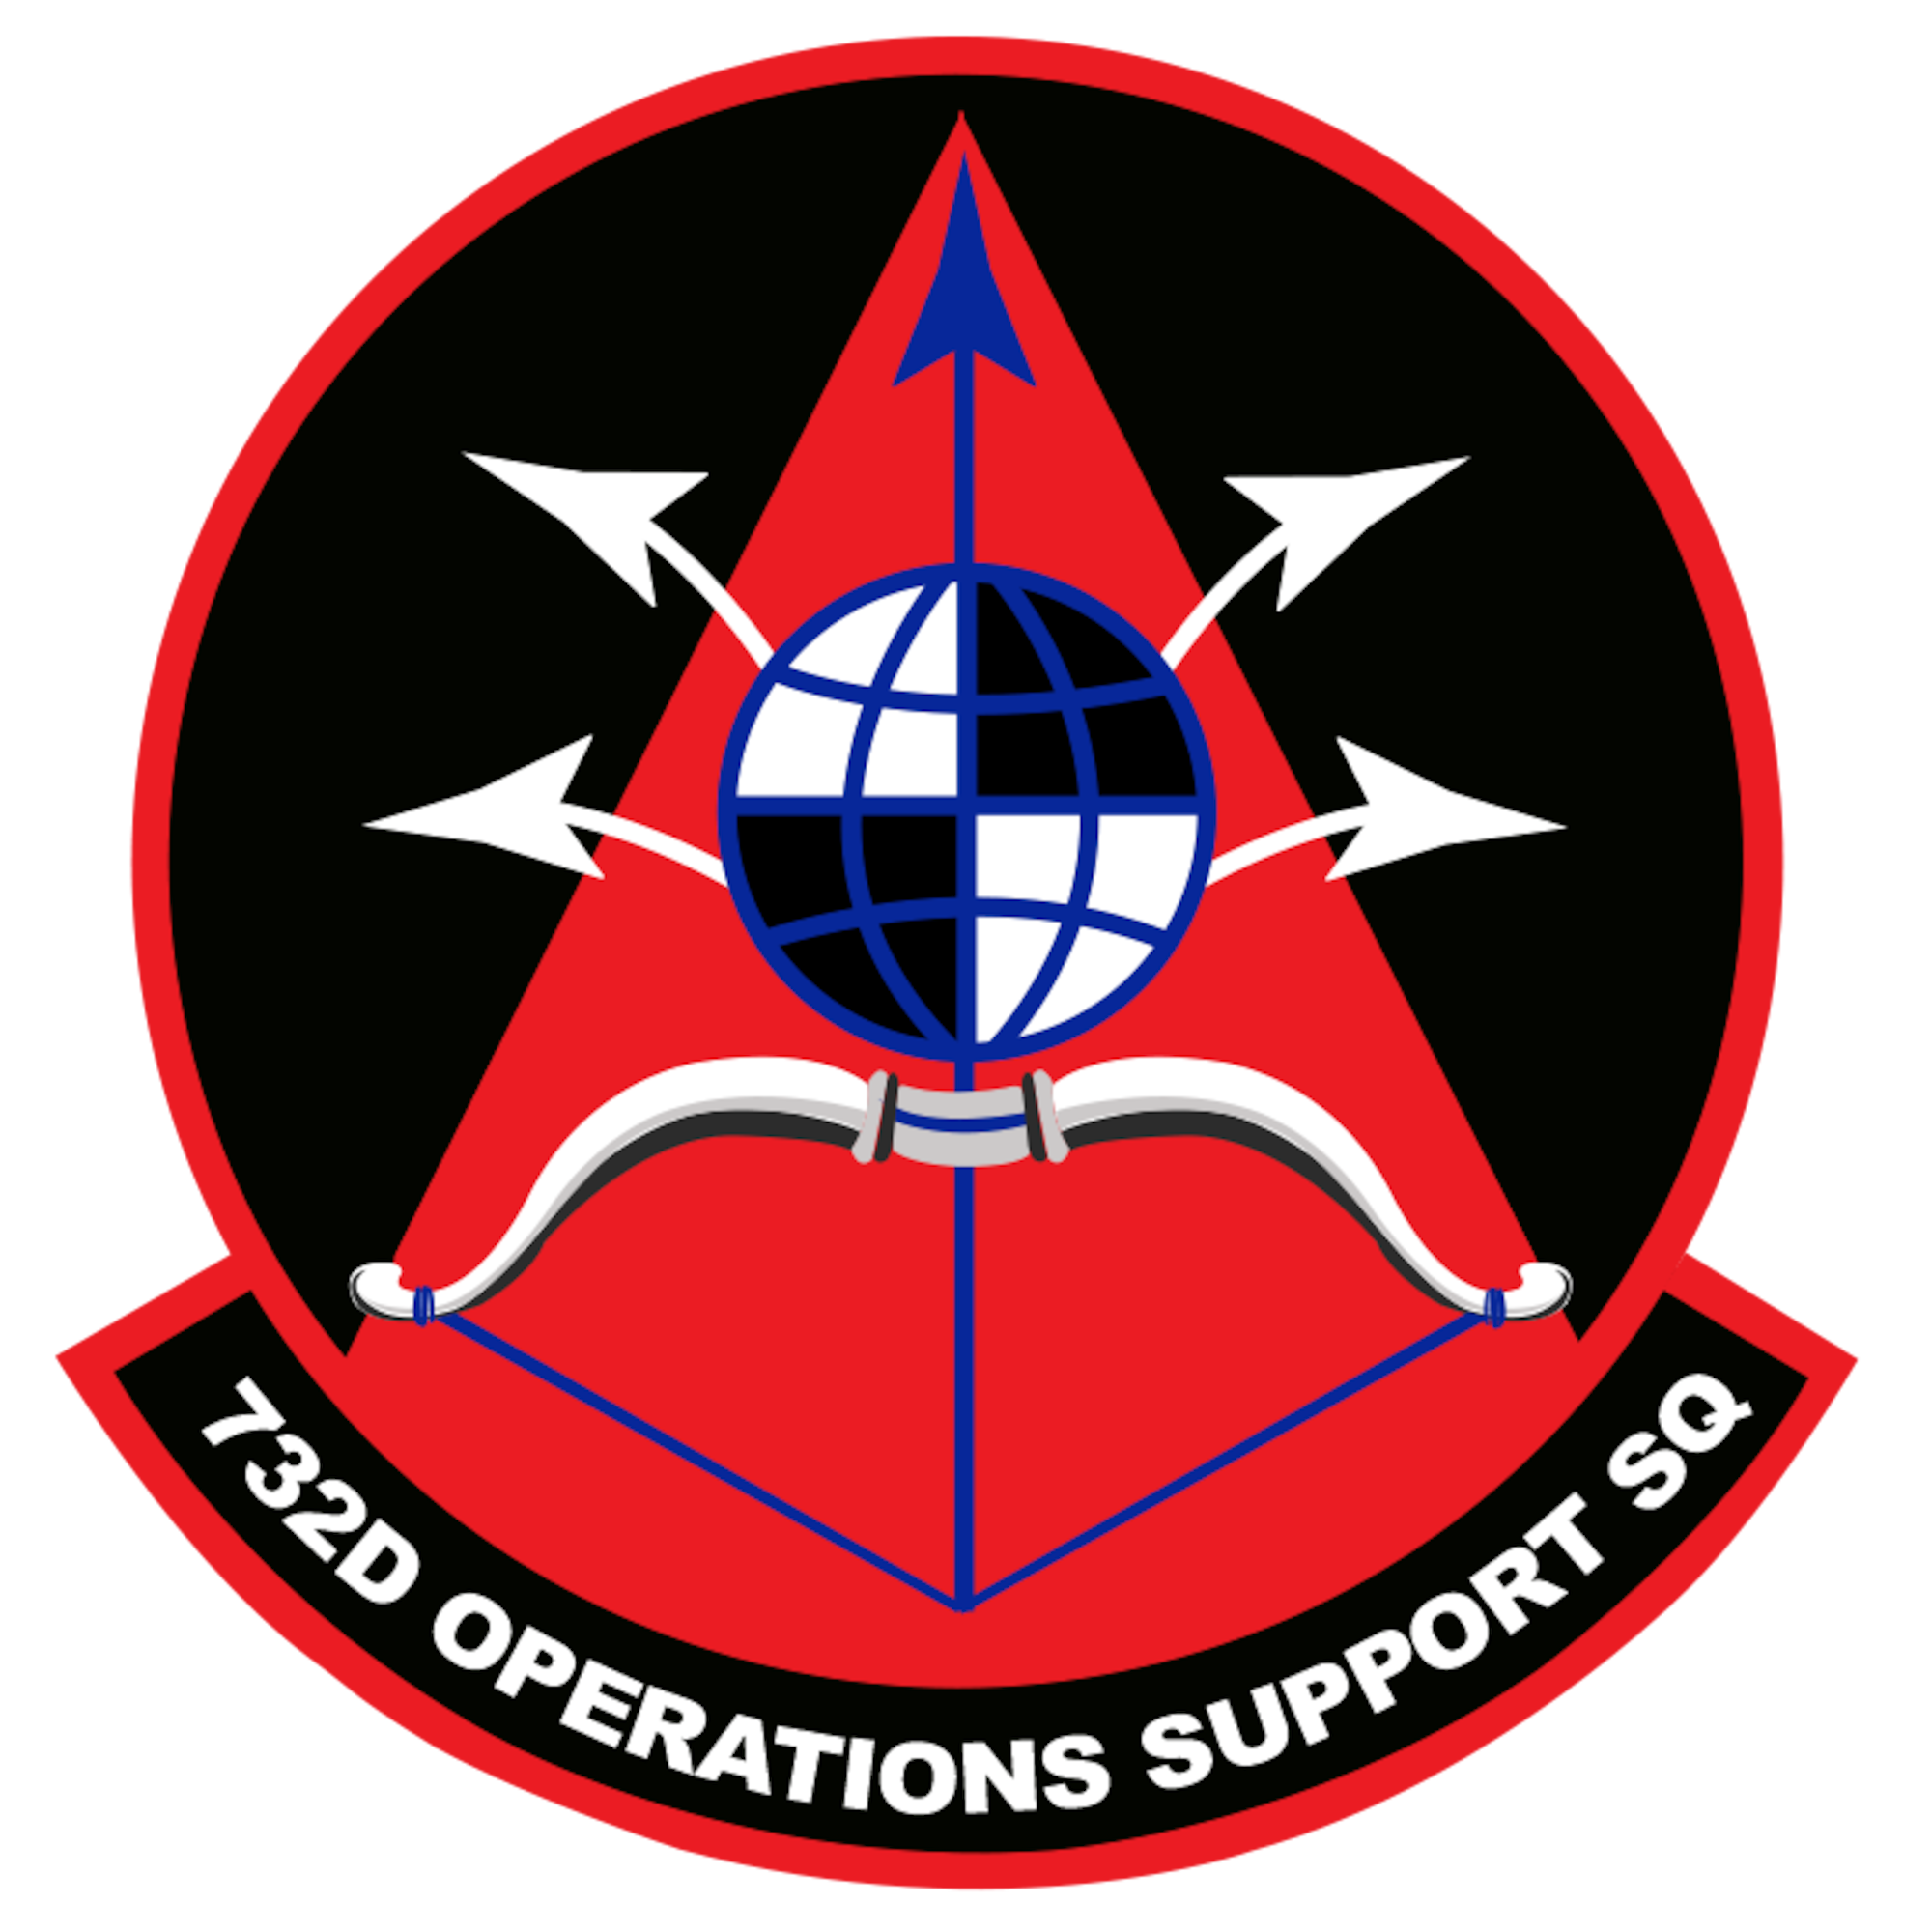 The 732nd Operations Support Squadron officially activated at Creech Air Force Base, Nevada, Jan. 23, 2019. The 732nd OSS Archers patch showcases a blue arrow leading the way through a red area representing the spreading of light. The Archers, like archers in many historic conflicts, will stay in the background drawing their bows to strike beyond the current battle to affect the future of it while setting their battlefield brothers and sisters up for success. (U.S. Air Force graphic by Senior Airman Christian Clausen)